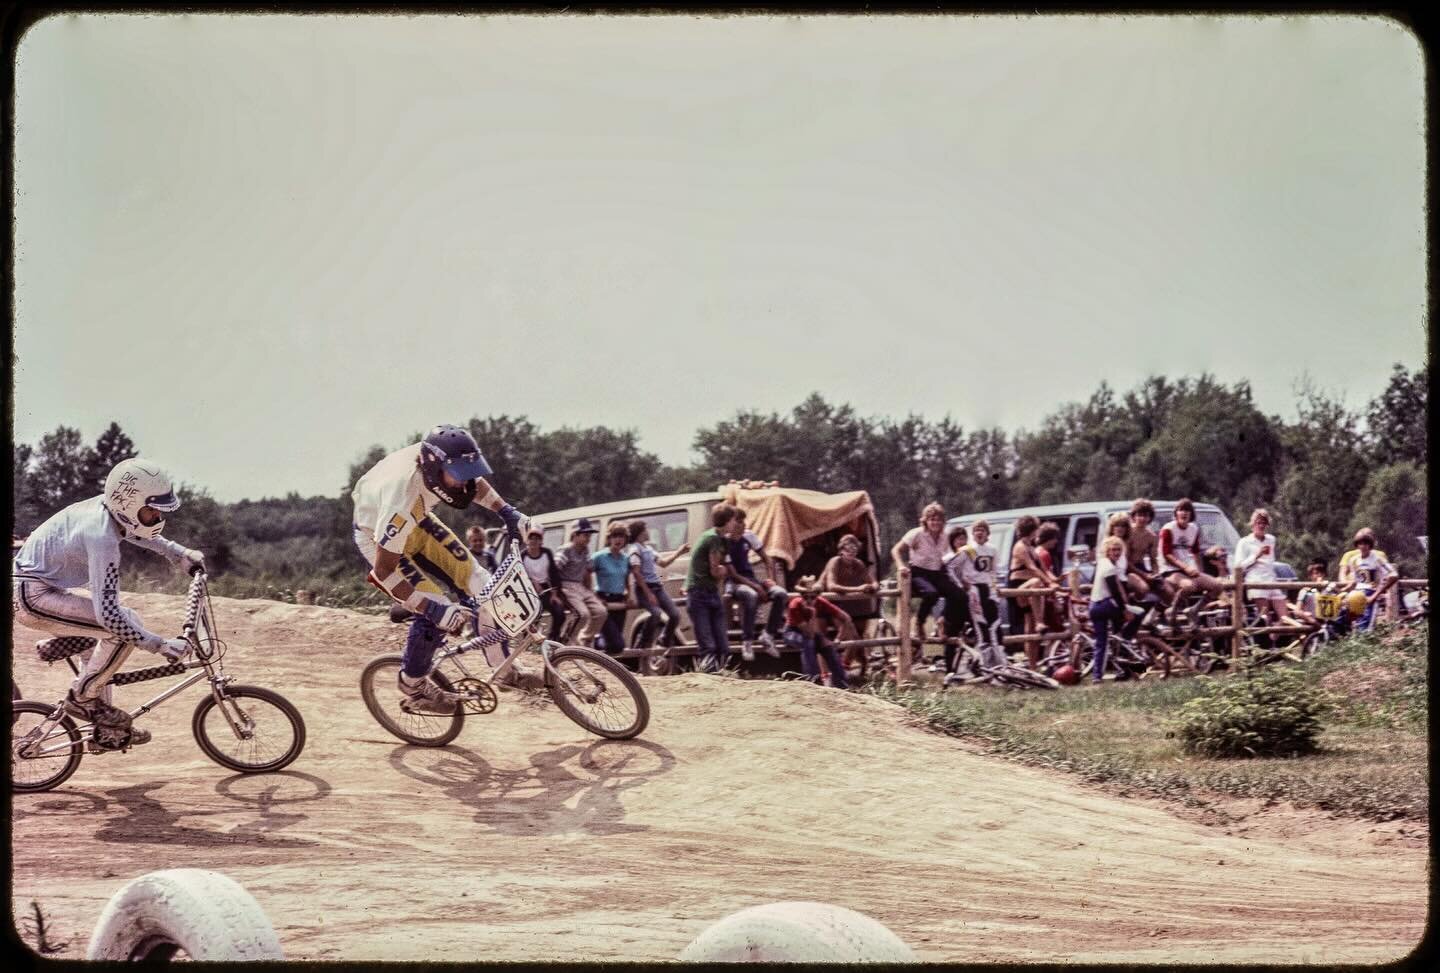 Old school BMX at the Escanaba track with Matt Marenger and his gifted &rsquo;DIG THE FACE FACE&rsquo; helmet giving chase to John Duflo. The original Ektachrome slides are stamped July 1983, so it was the last summer I raced BMX before moving on to 